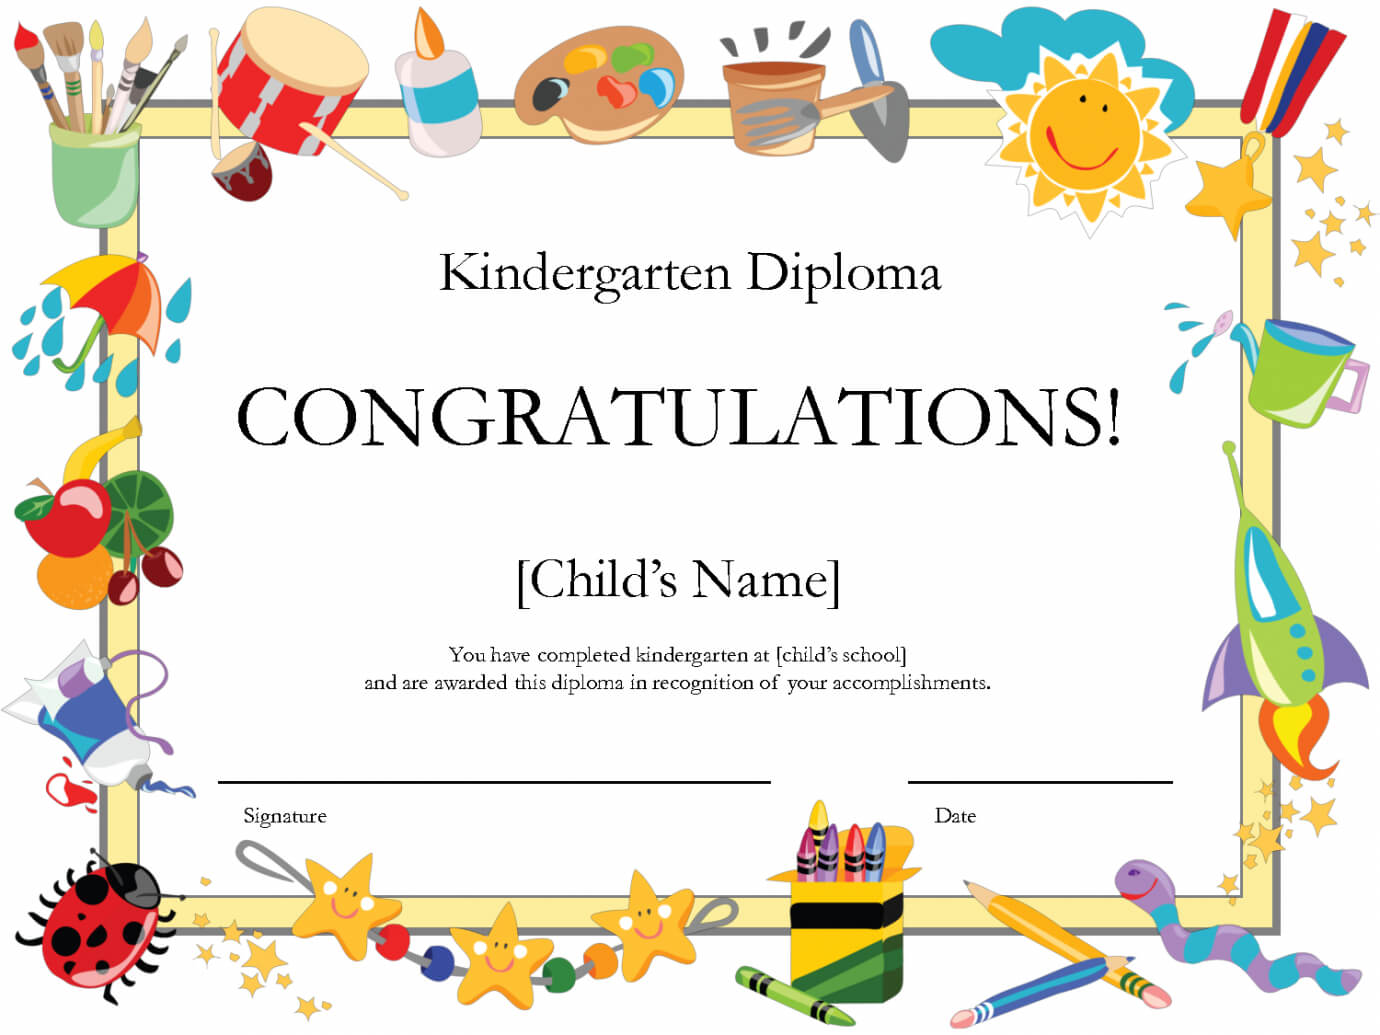 Sunday School Promotion Certificate Templates – Yatay With Regard To Free Vbs Certificate Templates